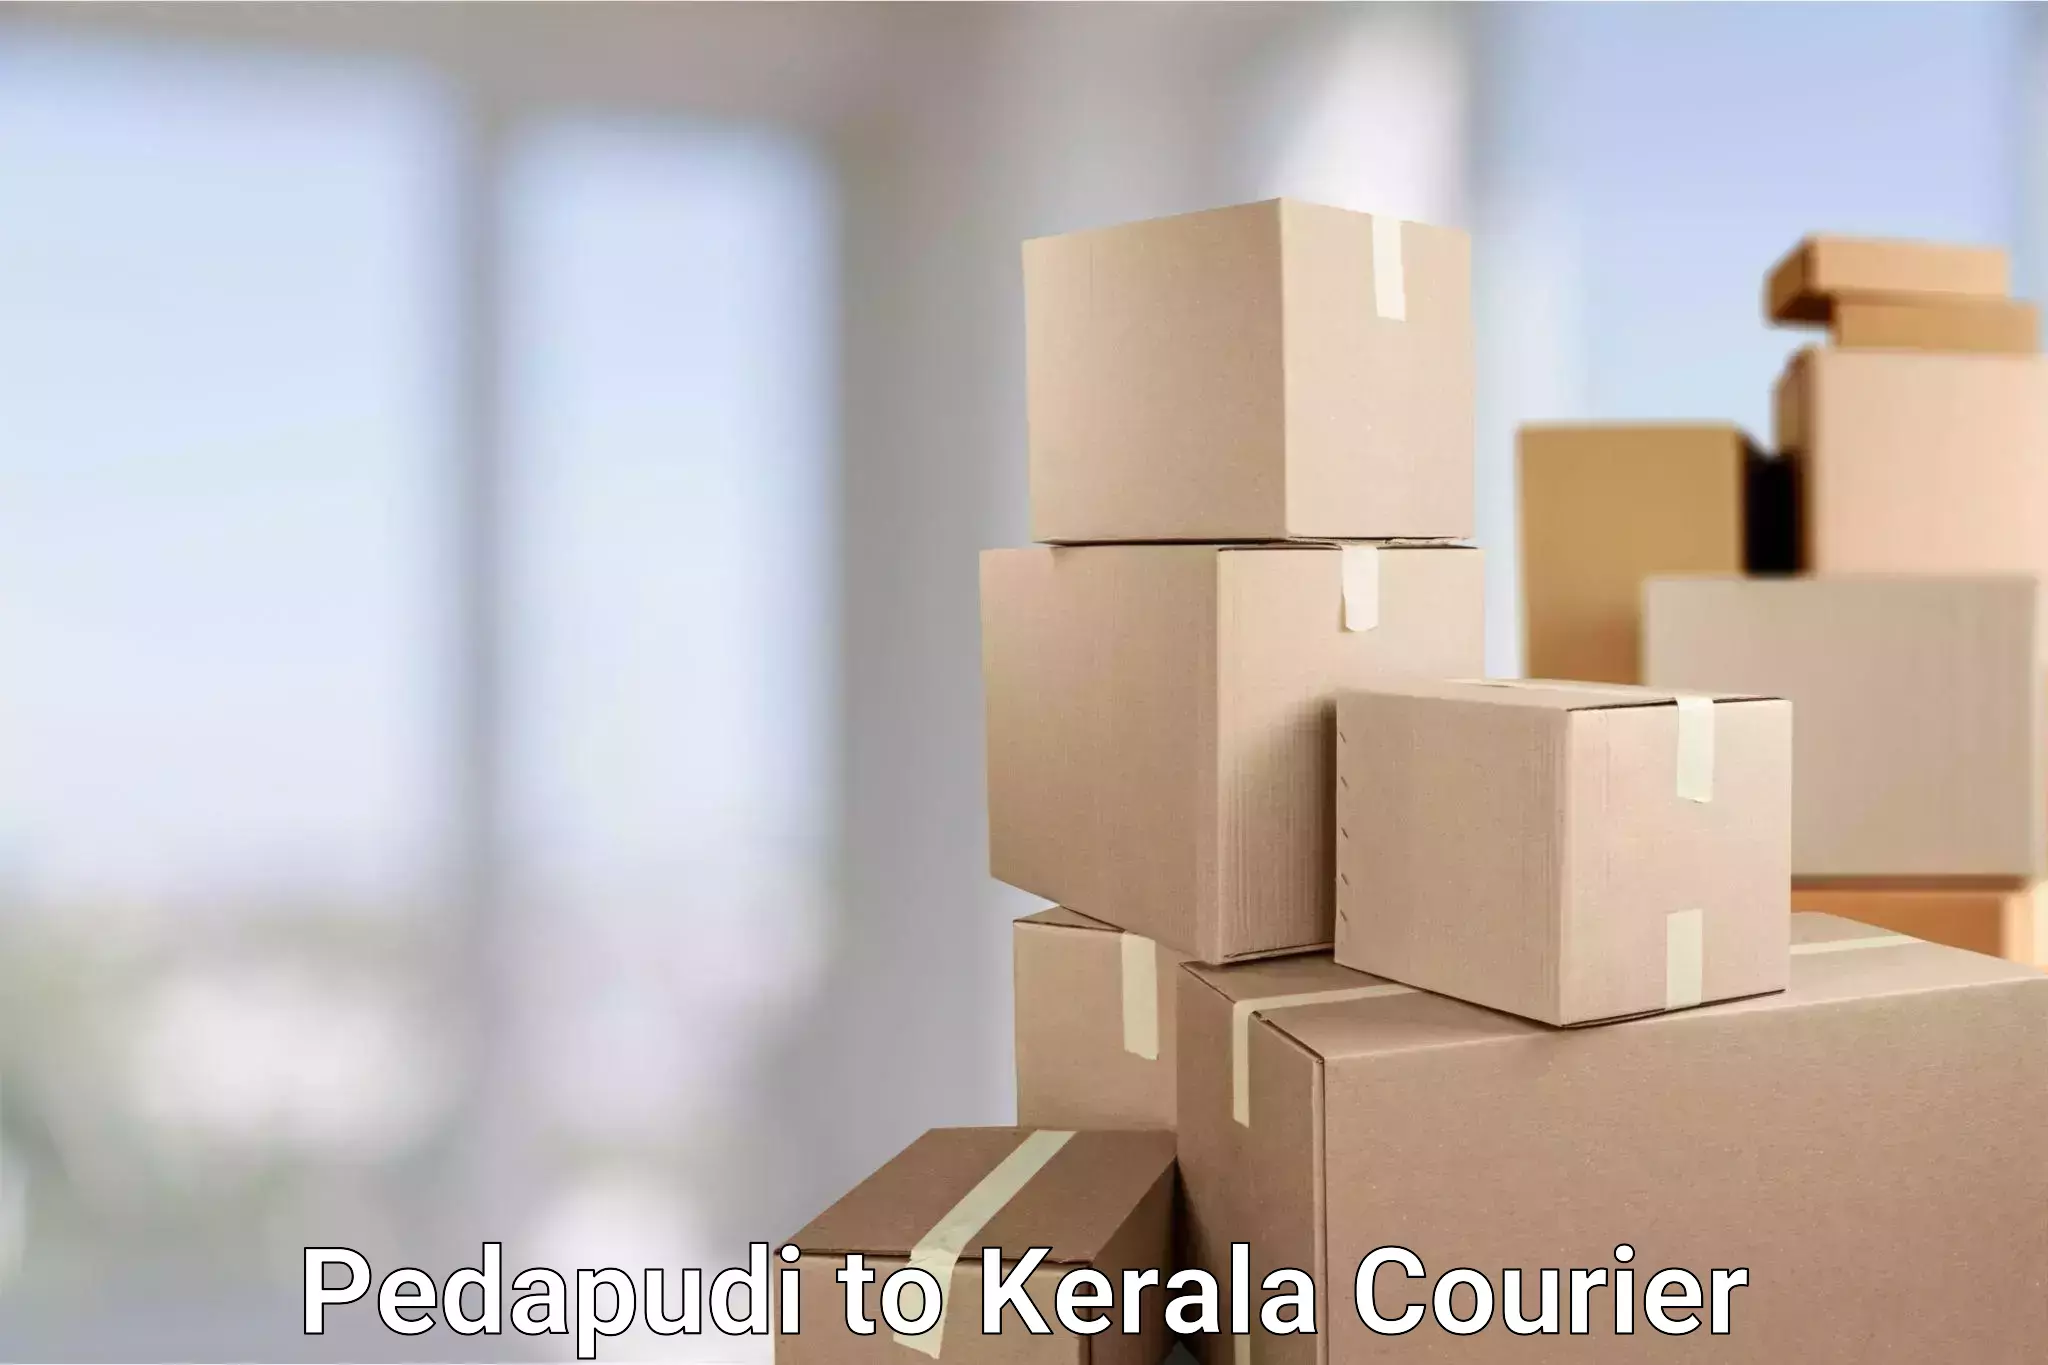 Nationwide shipping capabilities in Pedapudi to Chungatra